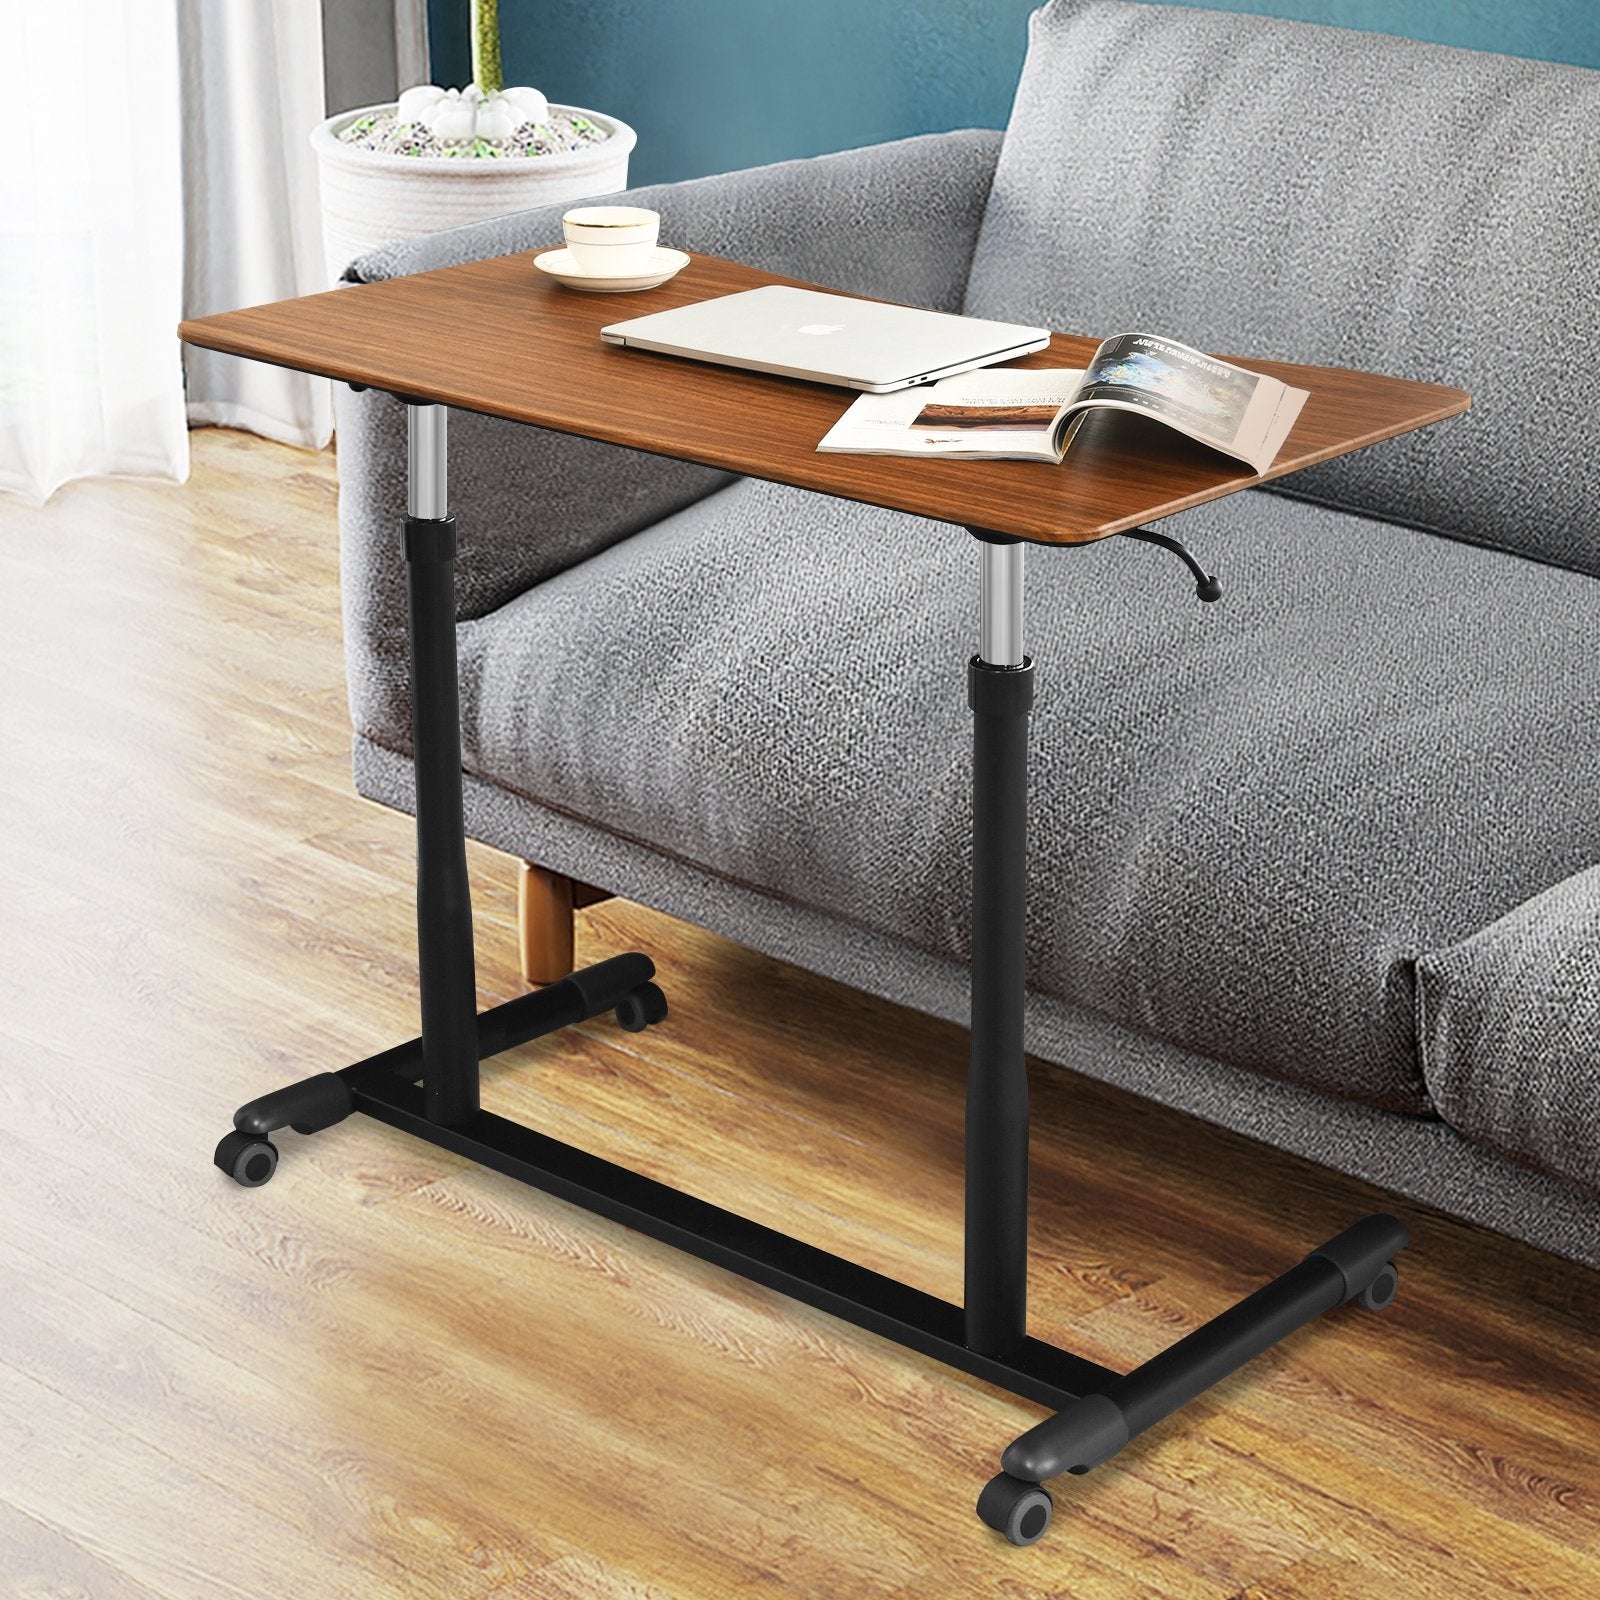 Height Adjustable Computer Desk Sit to Stand Rolling Notebook Table, Brown - Gallery Canada